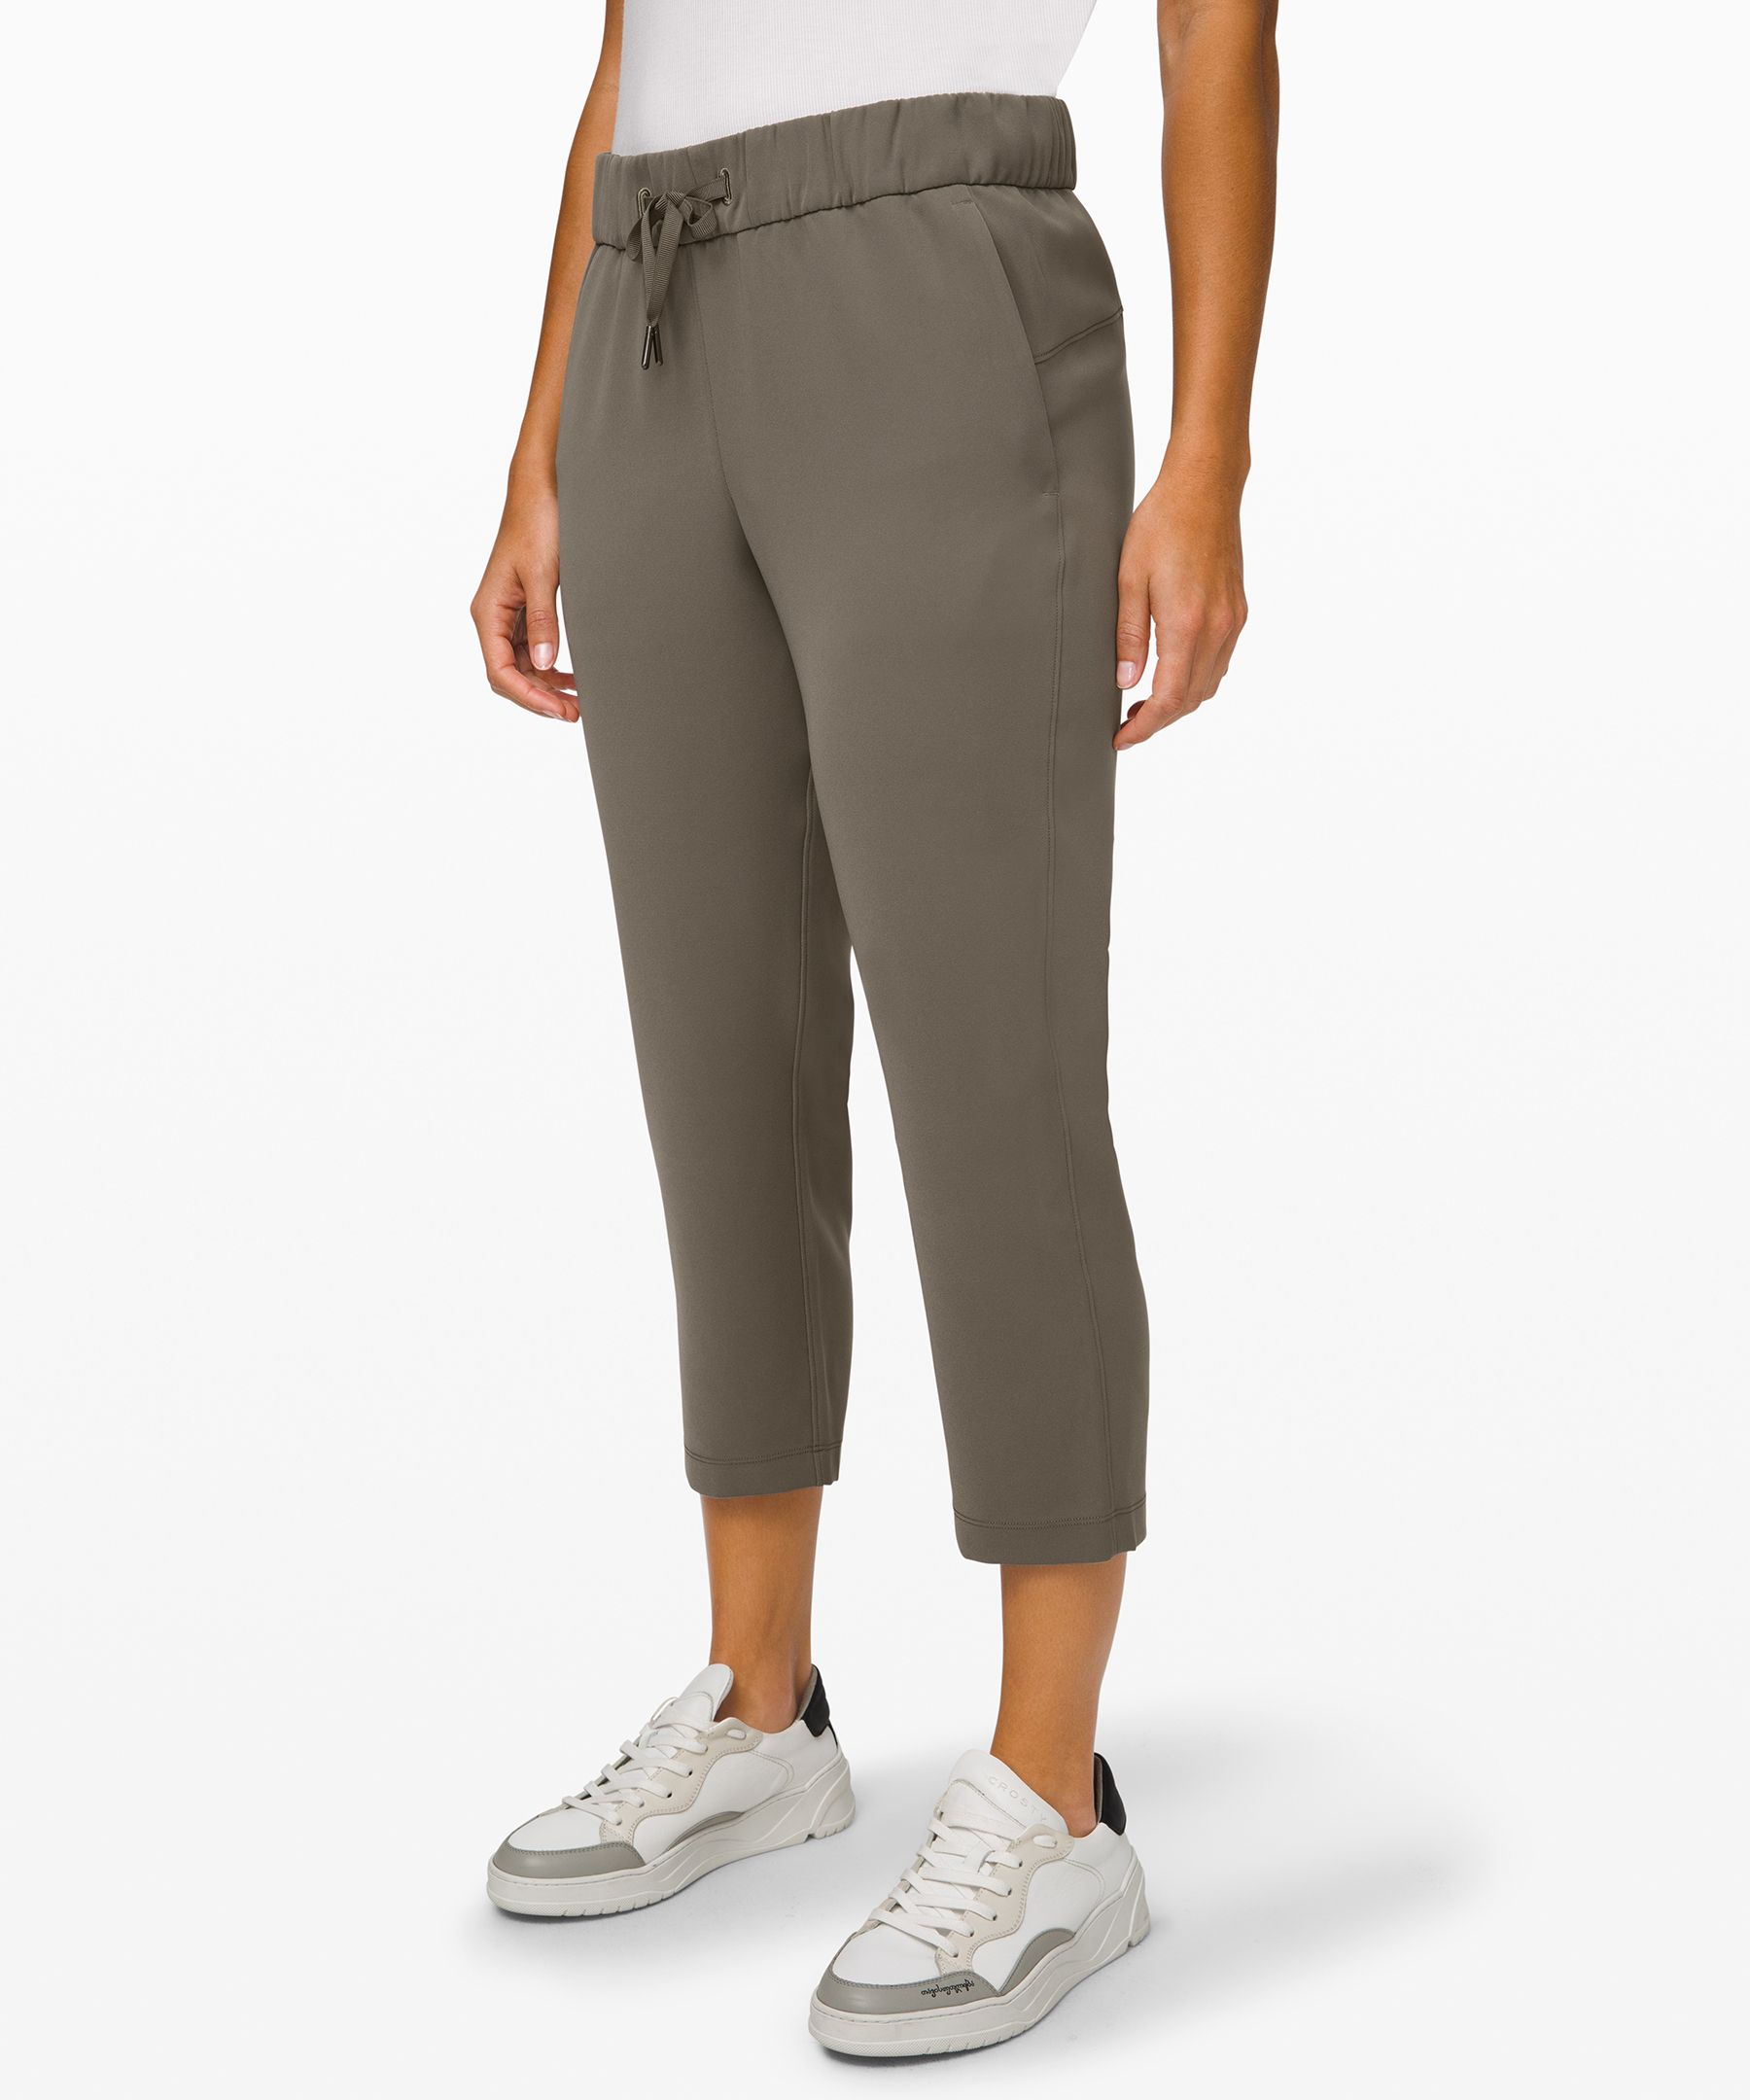 lululemon on the fly crop review